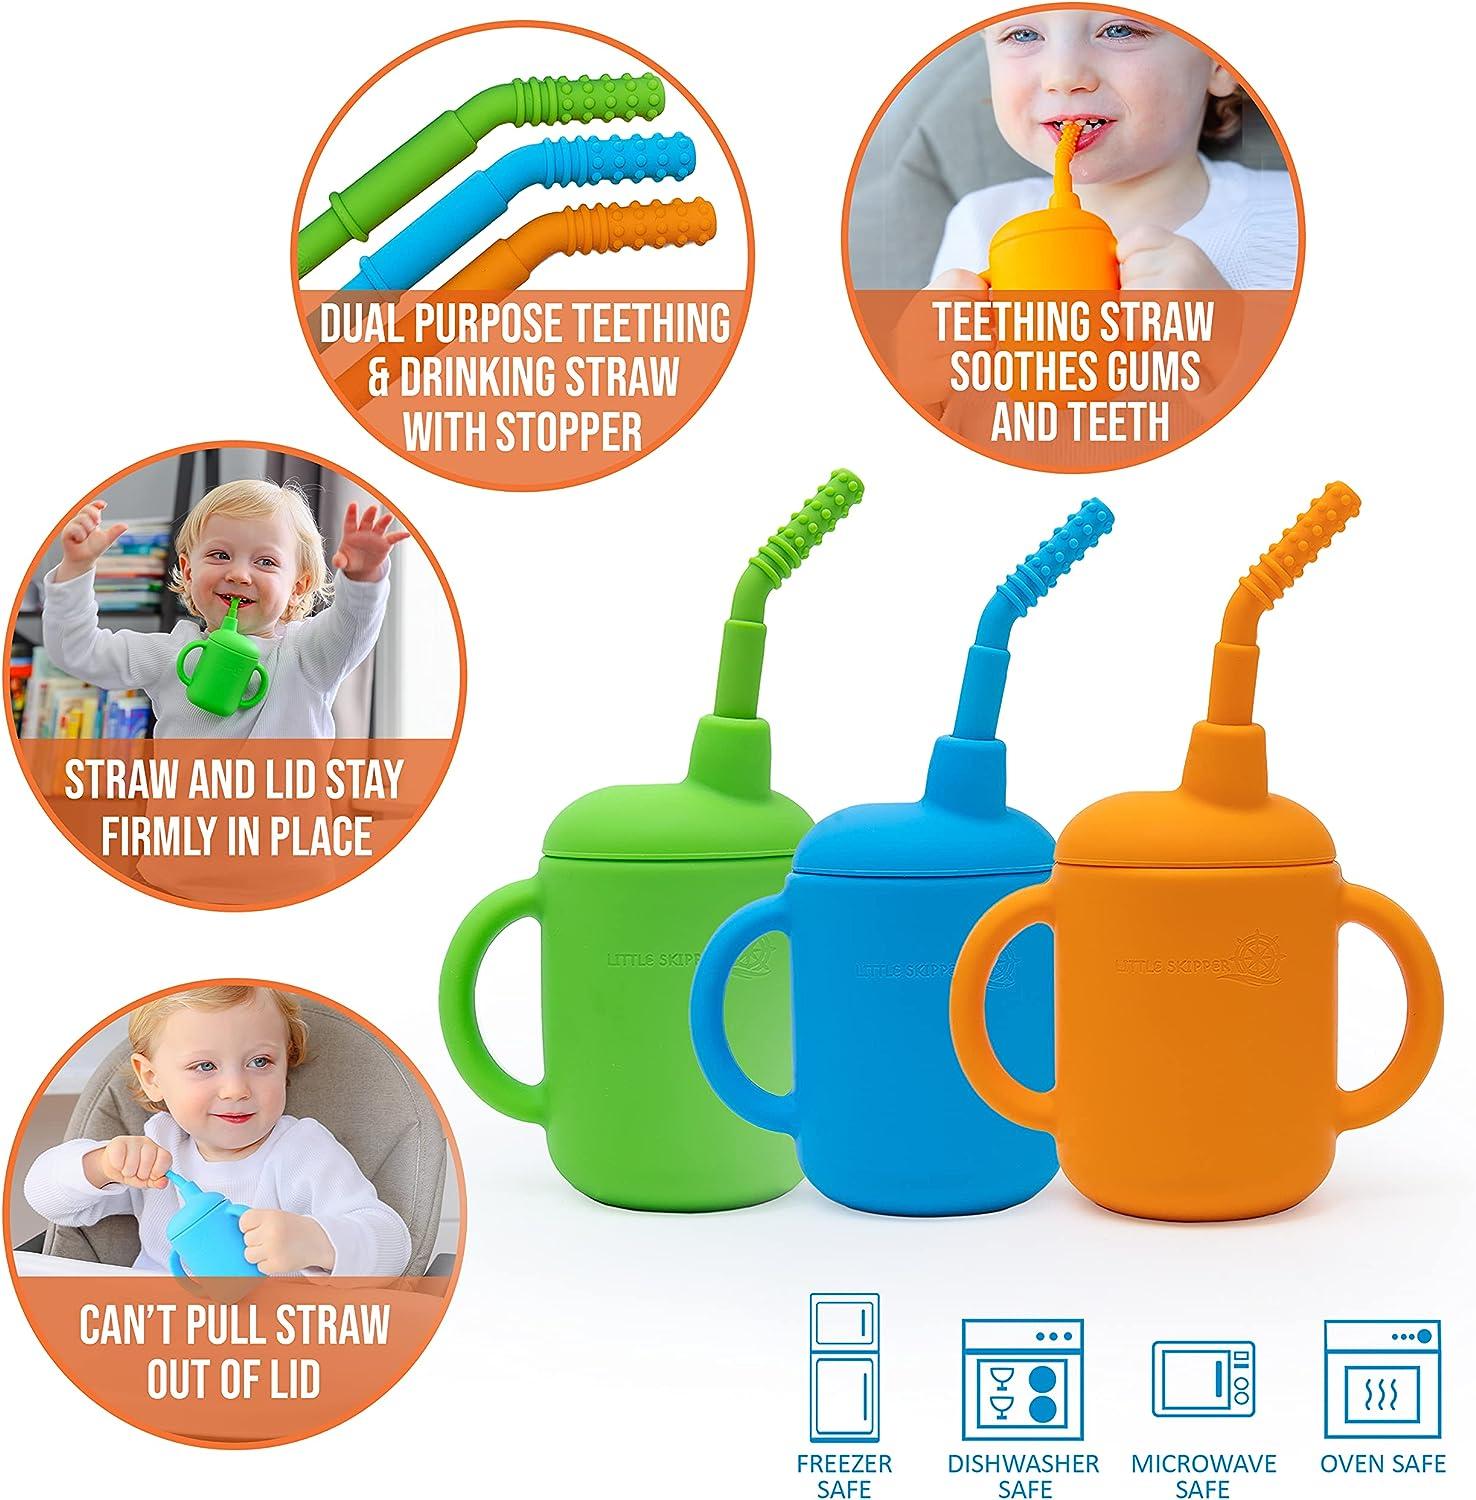 DF DUALFERV Toddler Sippy Cups, Sippy Cups for Baby 6+ Months, Toddler Cups  with Two Non Slip Handle…See more DF DUALFERV Toddler Sippy Cups, Sippy